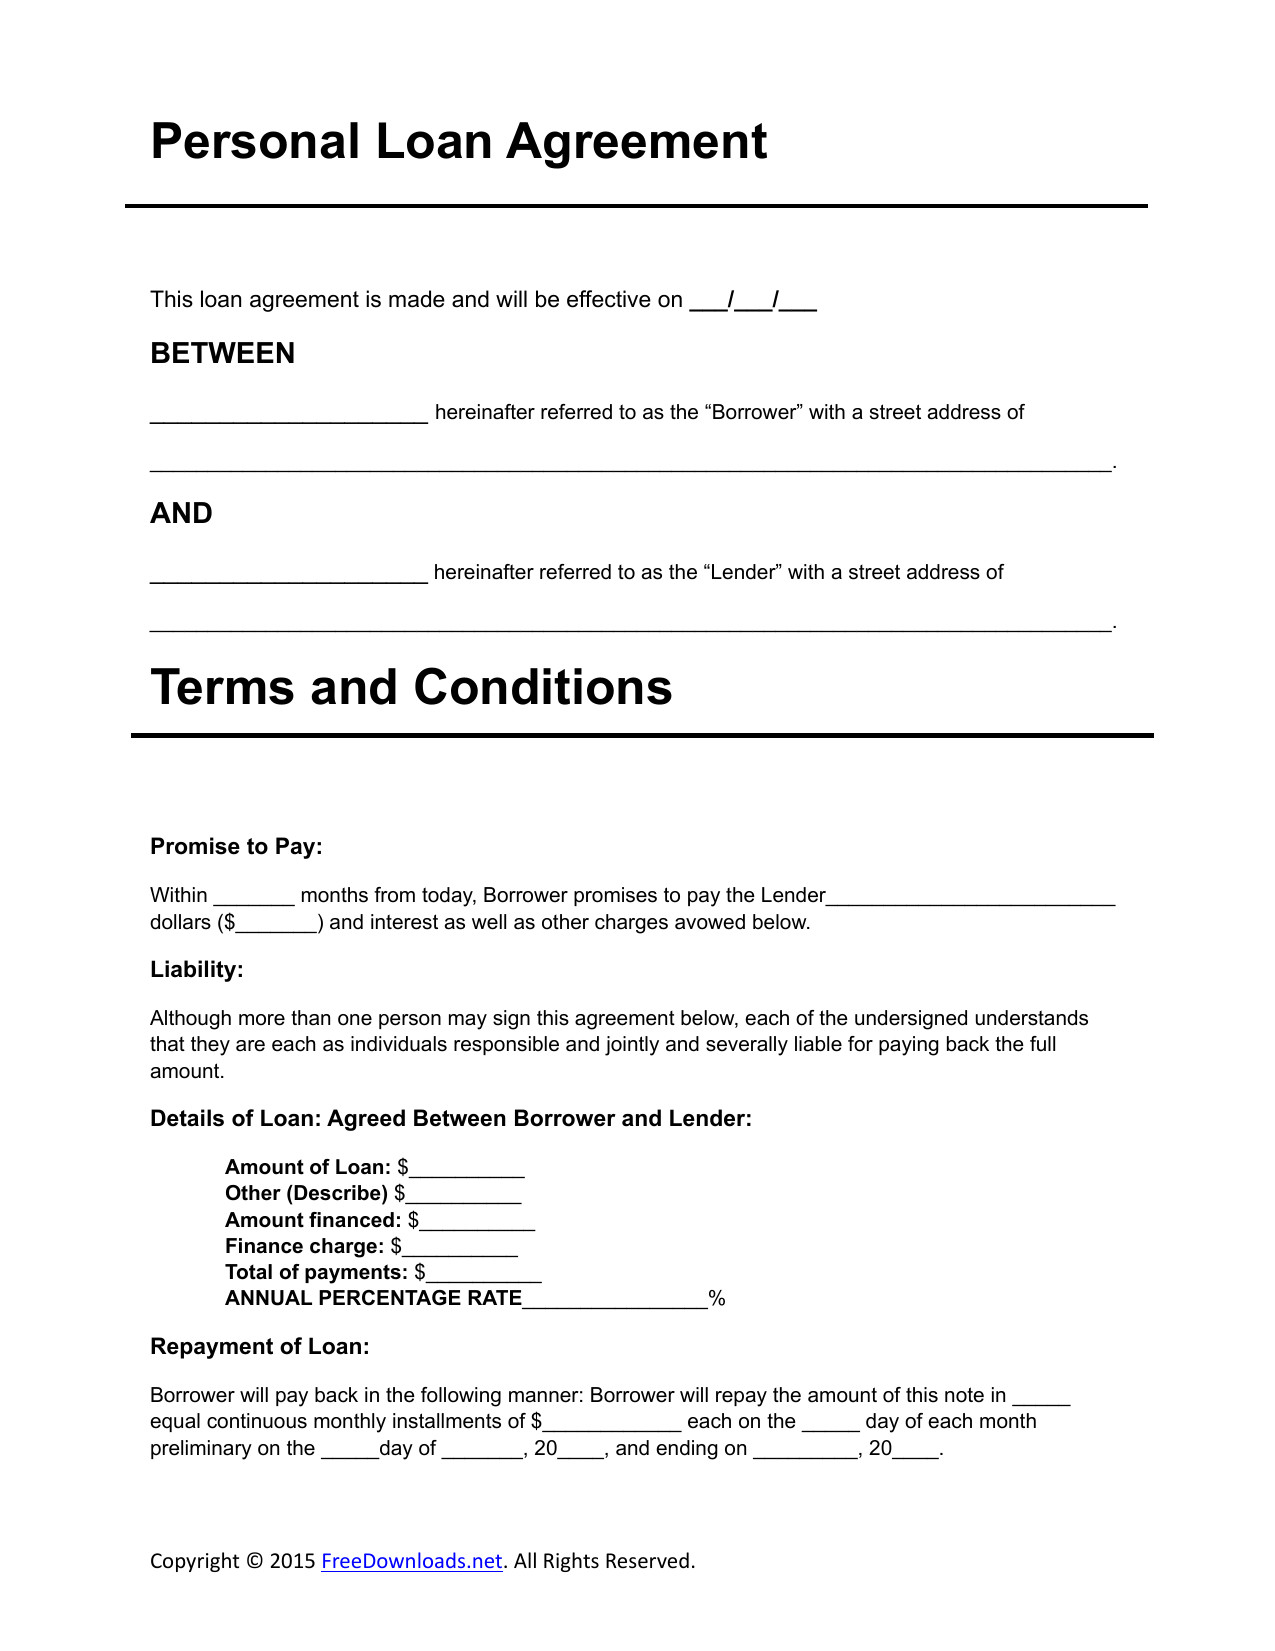 Personal Loan form Template Download Personal Loan Agreement Template Pdf